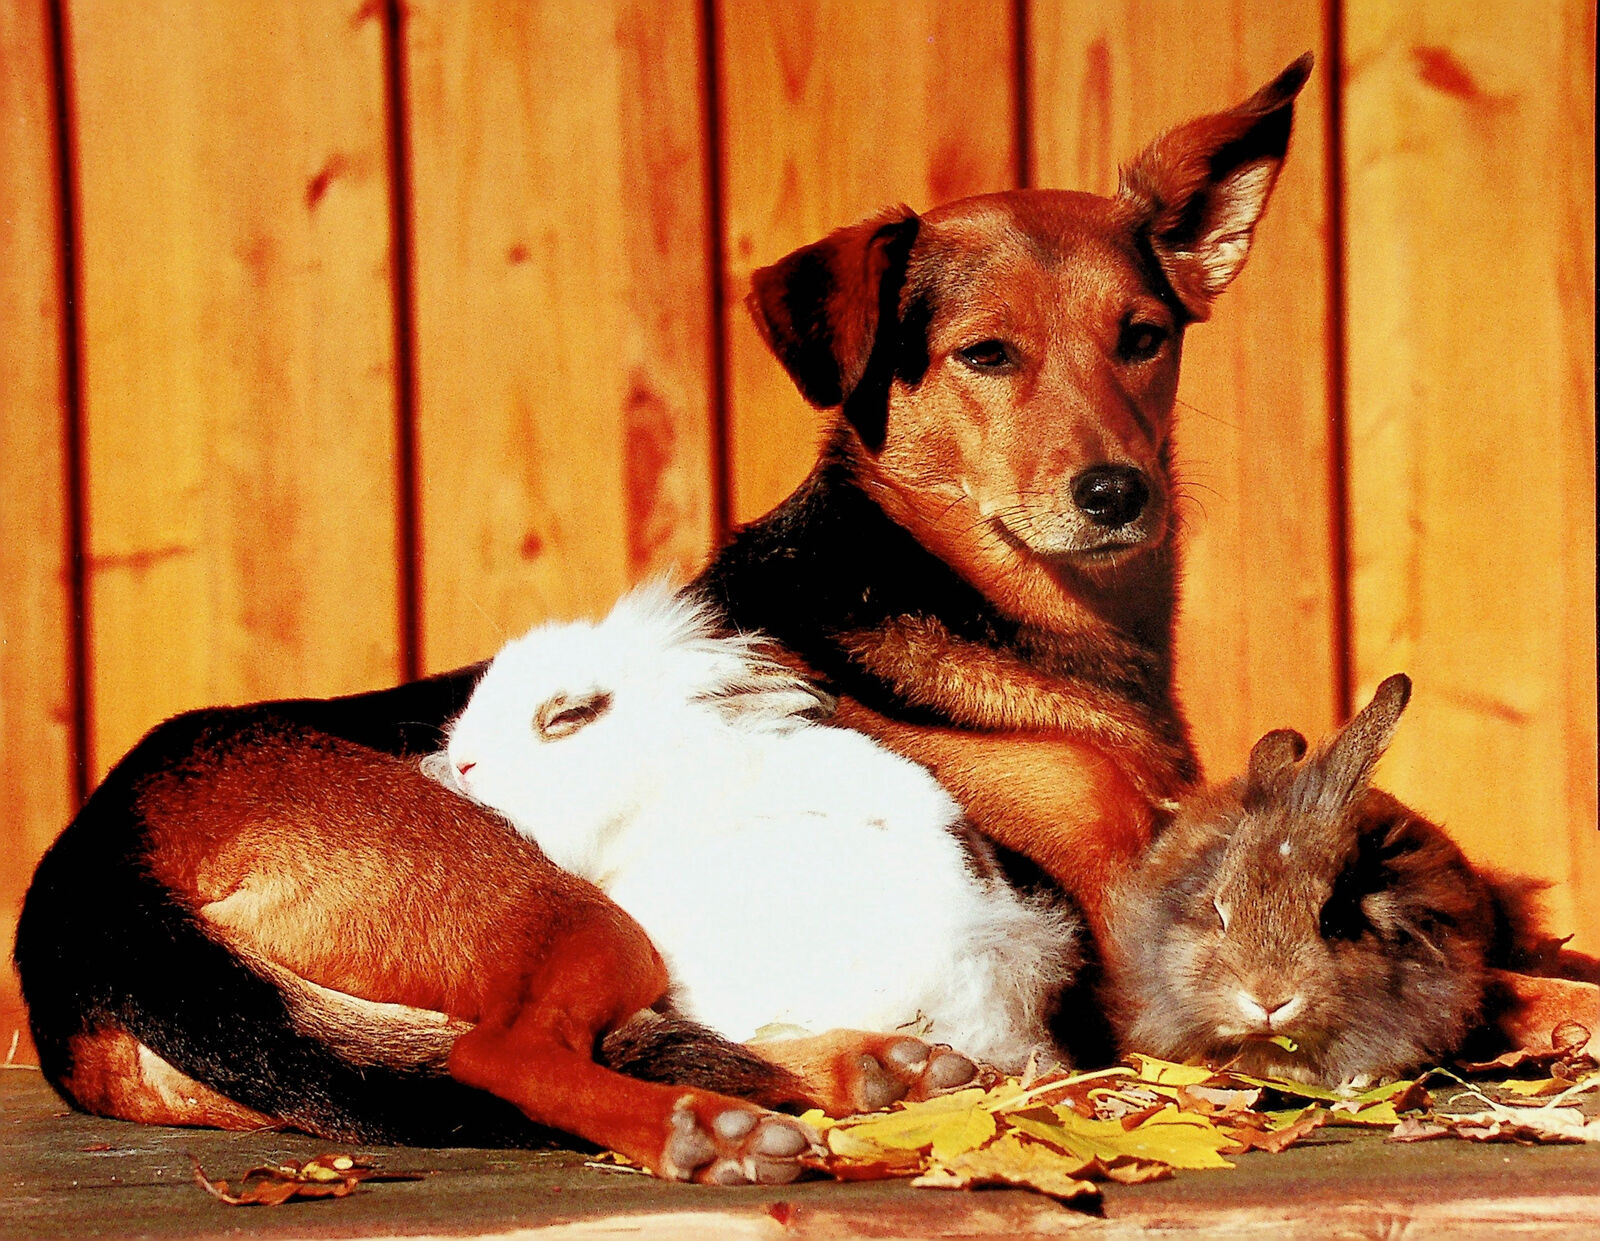 Farm Dog Looking After Some Rabbits - Farm Animal Poster 9